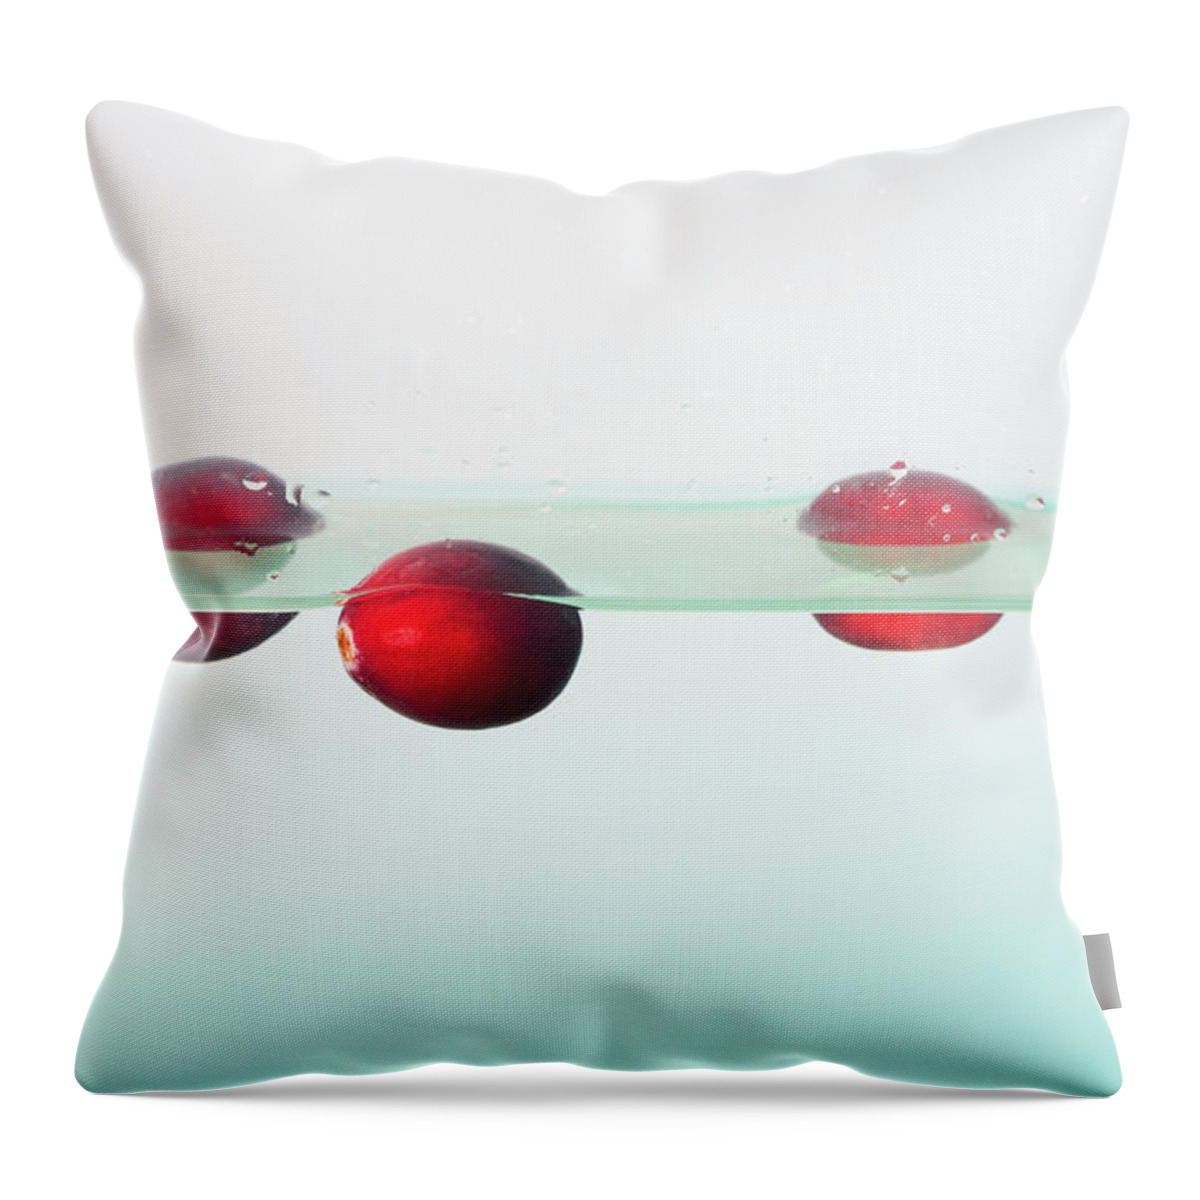 Cranberries Throw Pillow featuring the photograph Floating Cranberries by Diane Macdonald